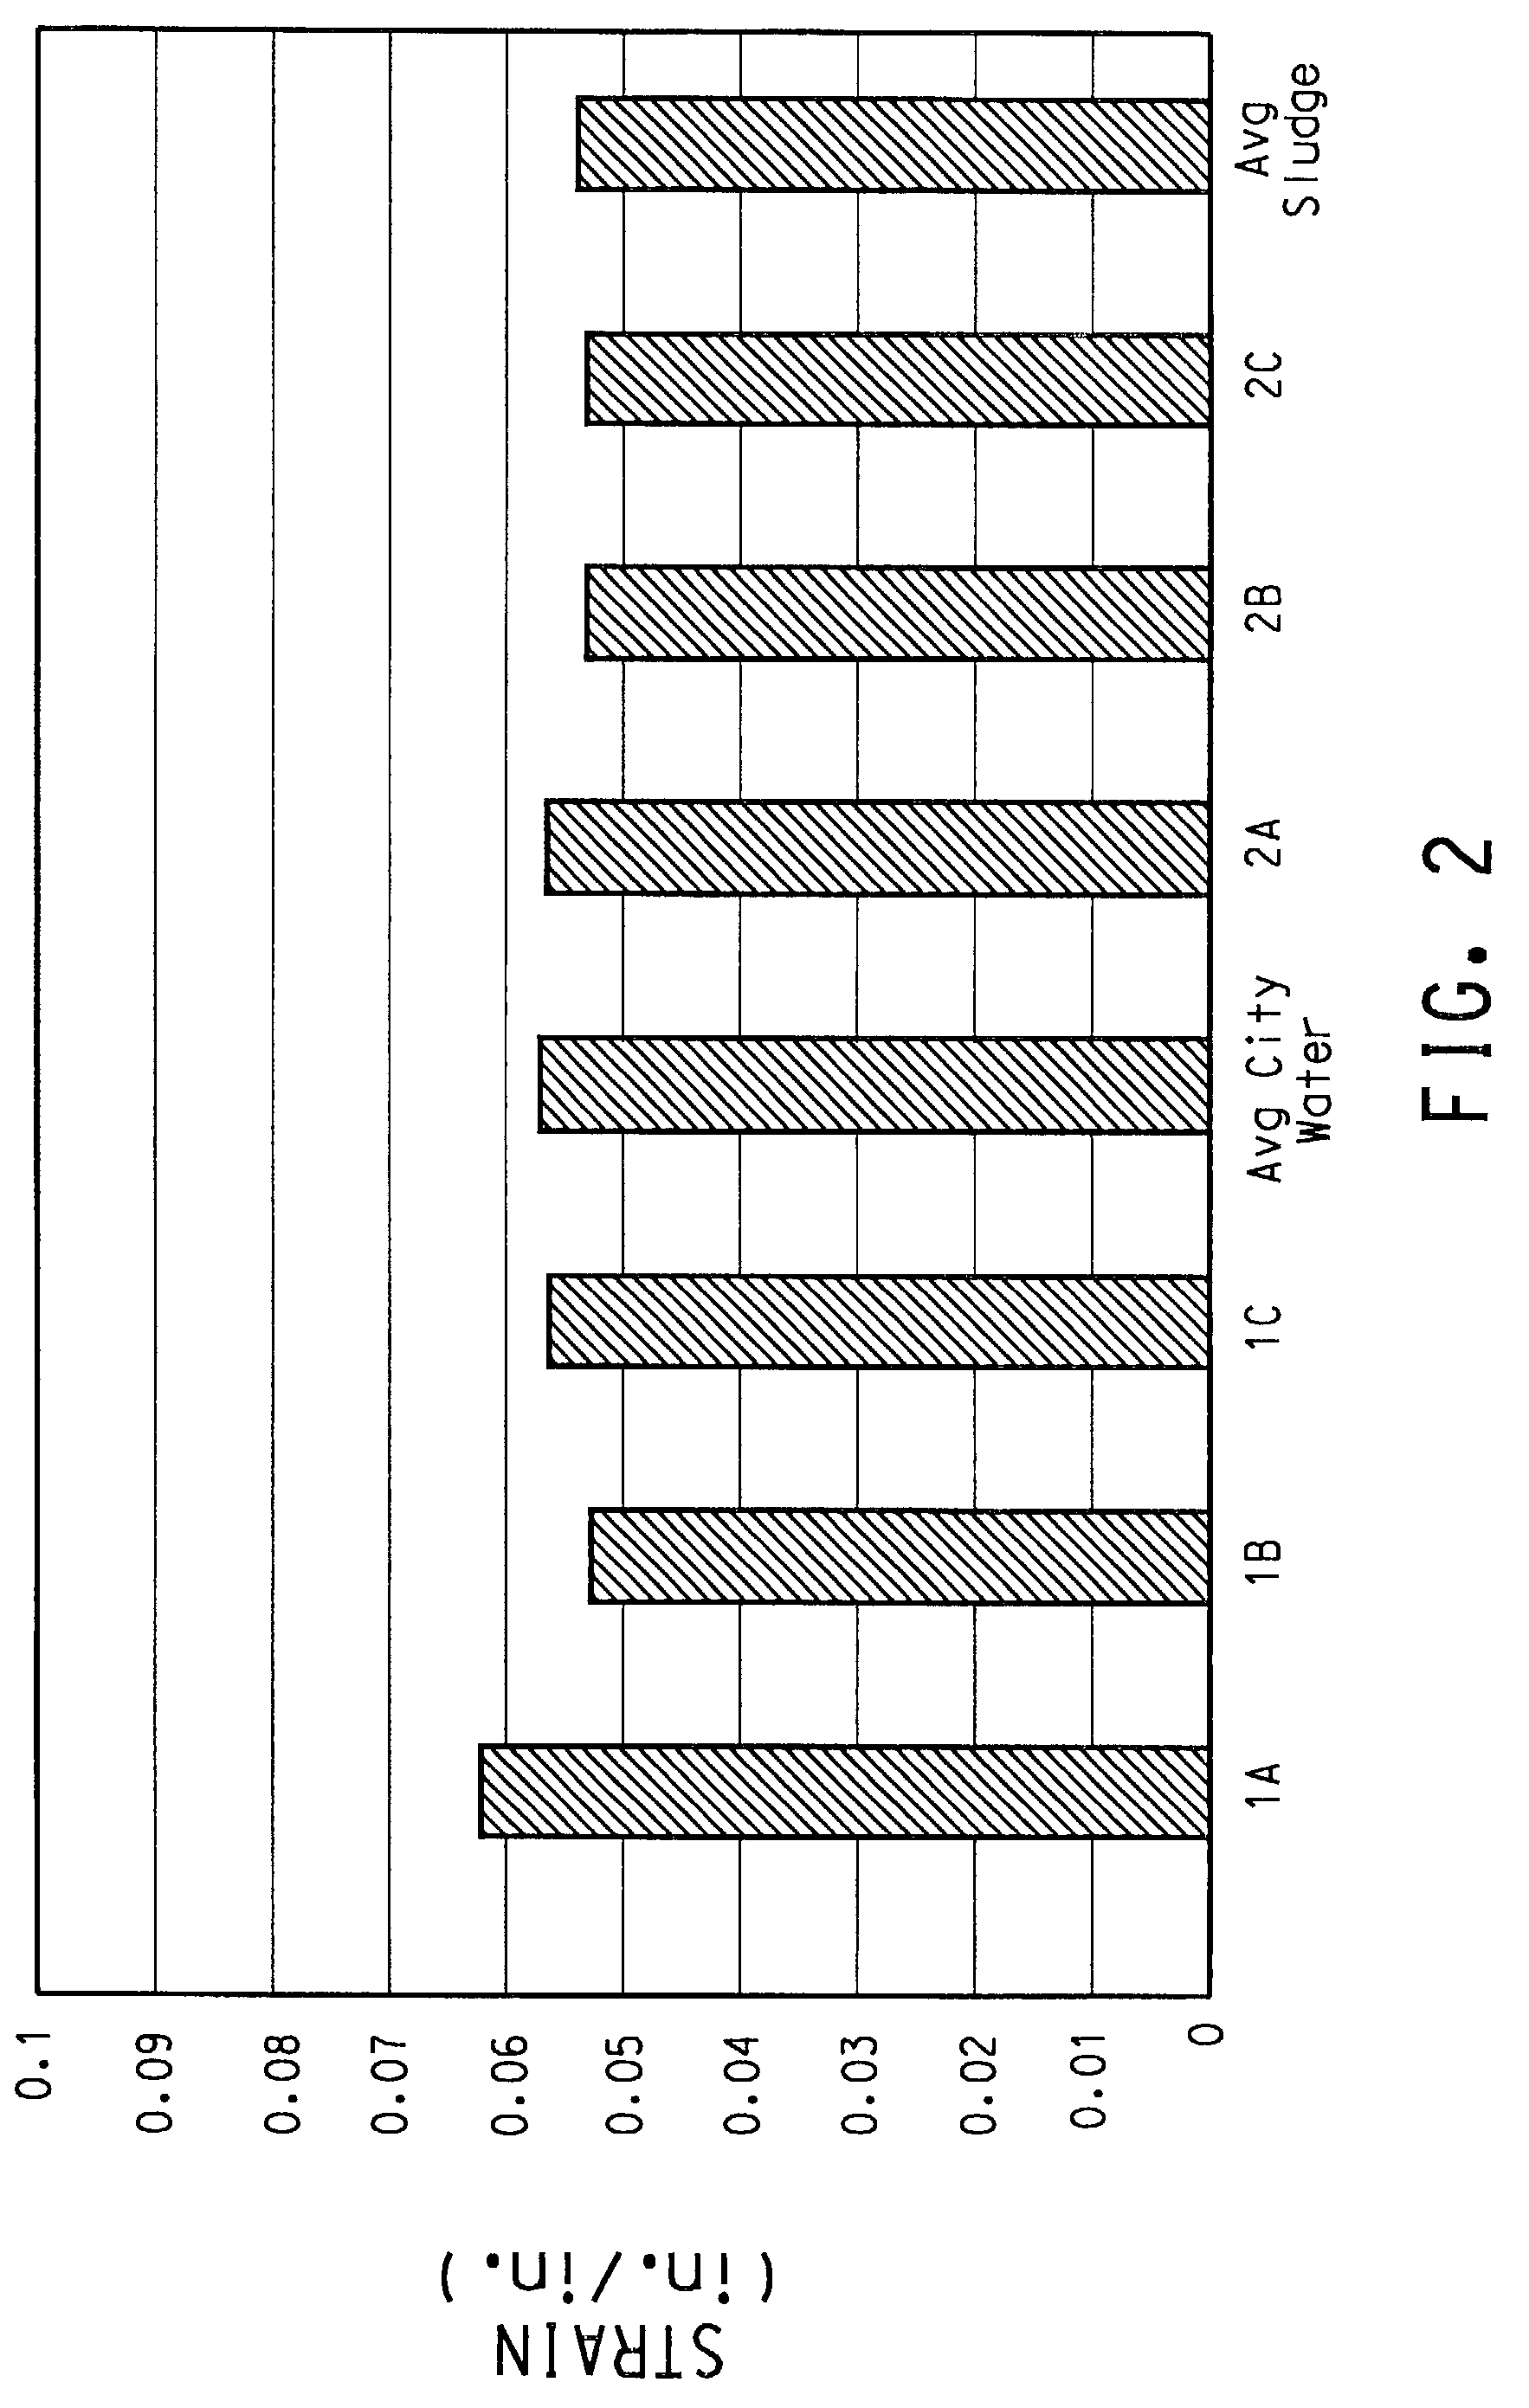 Process for producing building materials from raw paint sludge